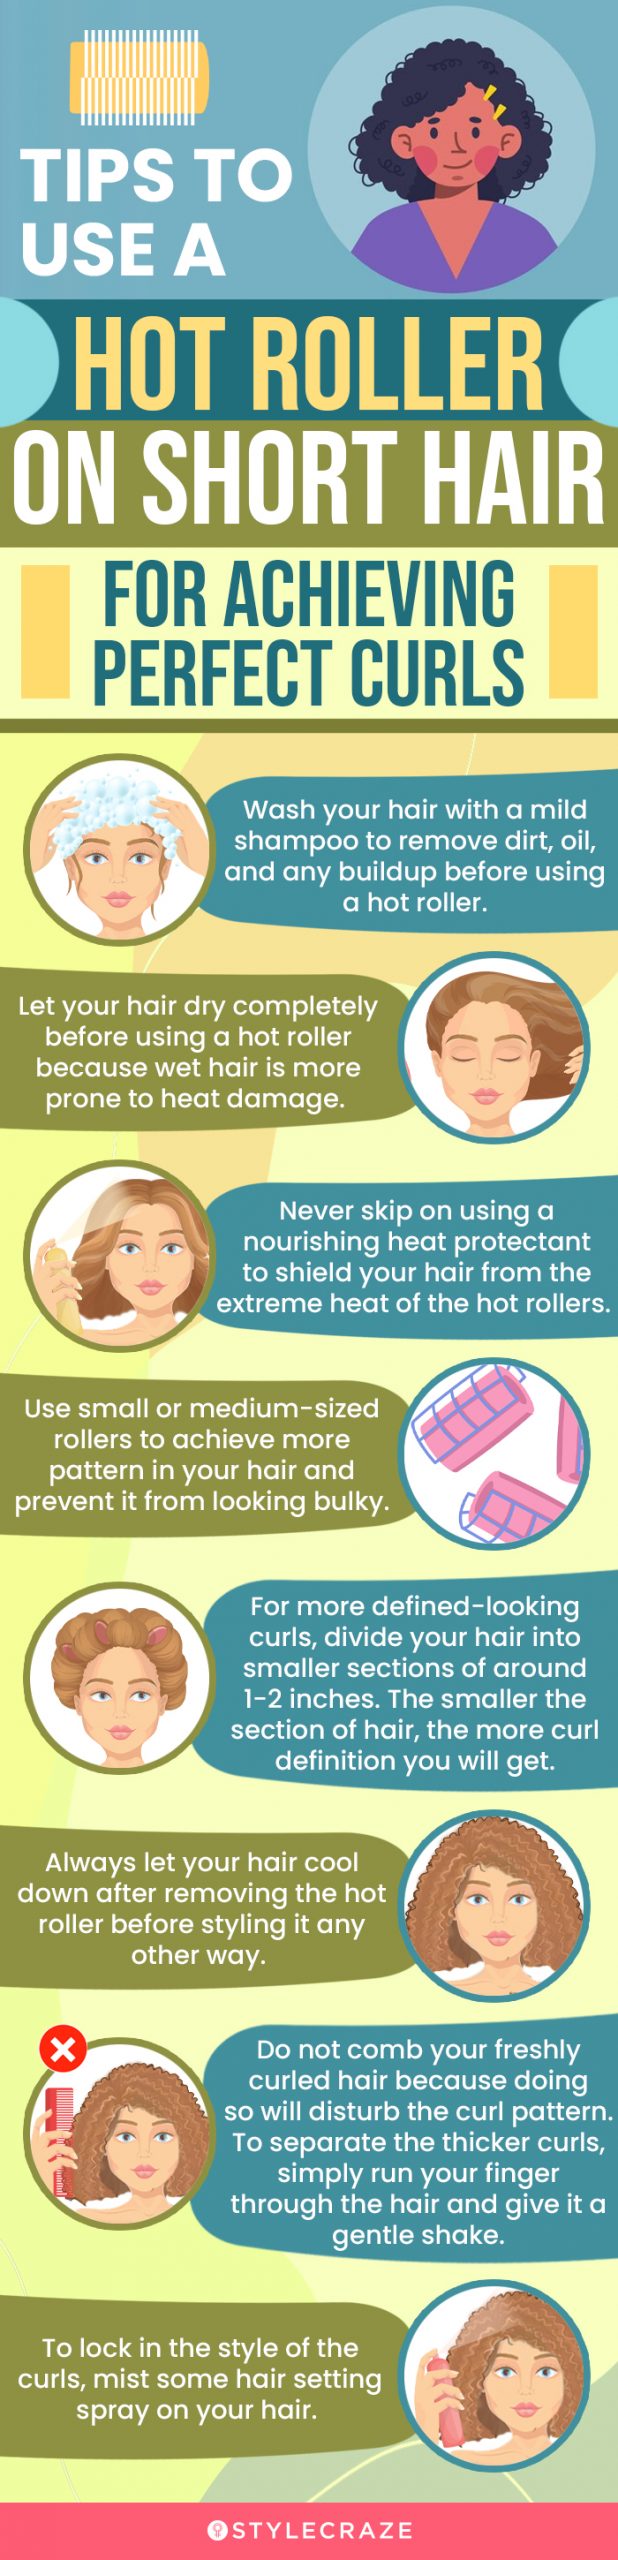 Tips To Use A Hot Roller On Short Hair For Achieving Perfect Curls (infographic)